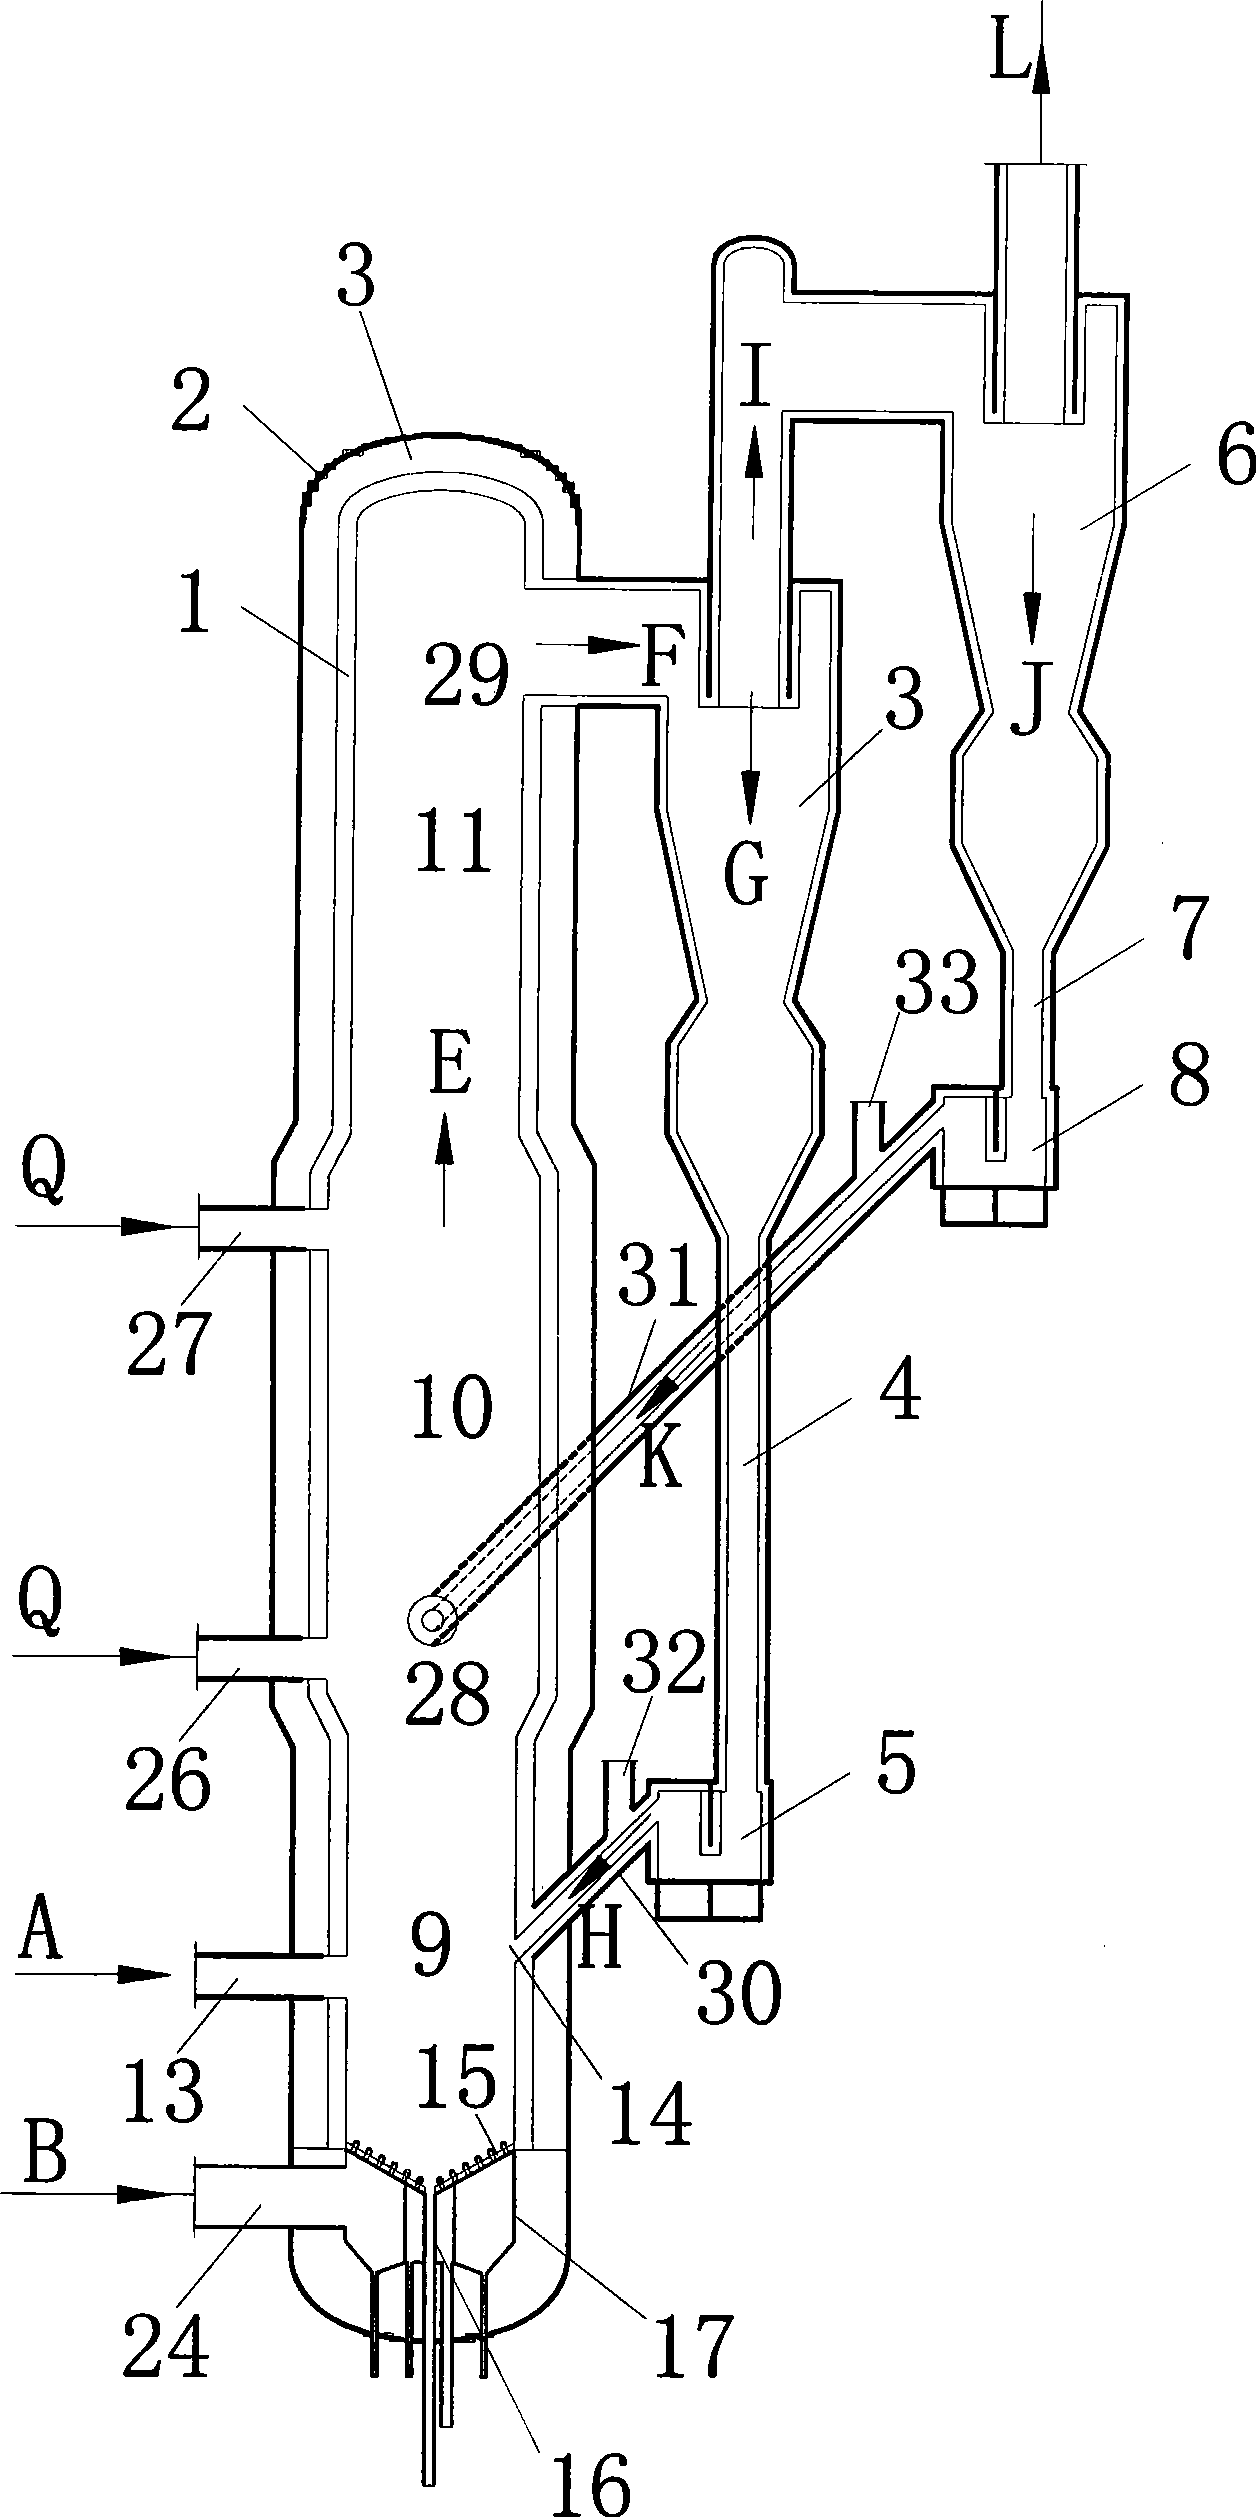 High-density pressurized fluidized bed coal gasification apparatus and method